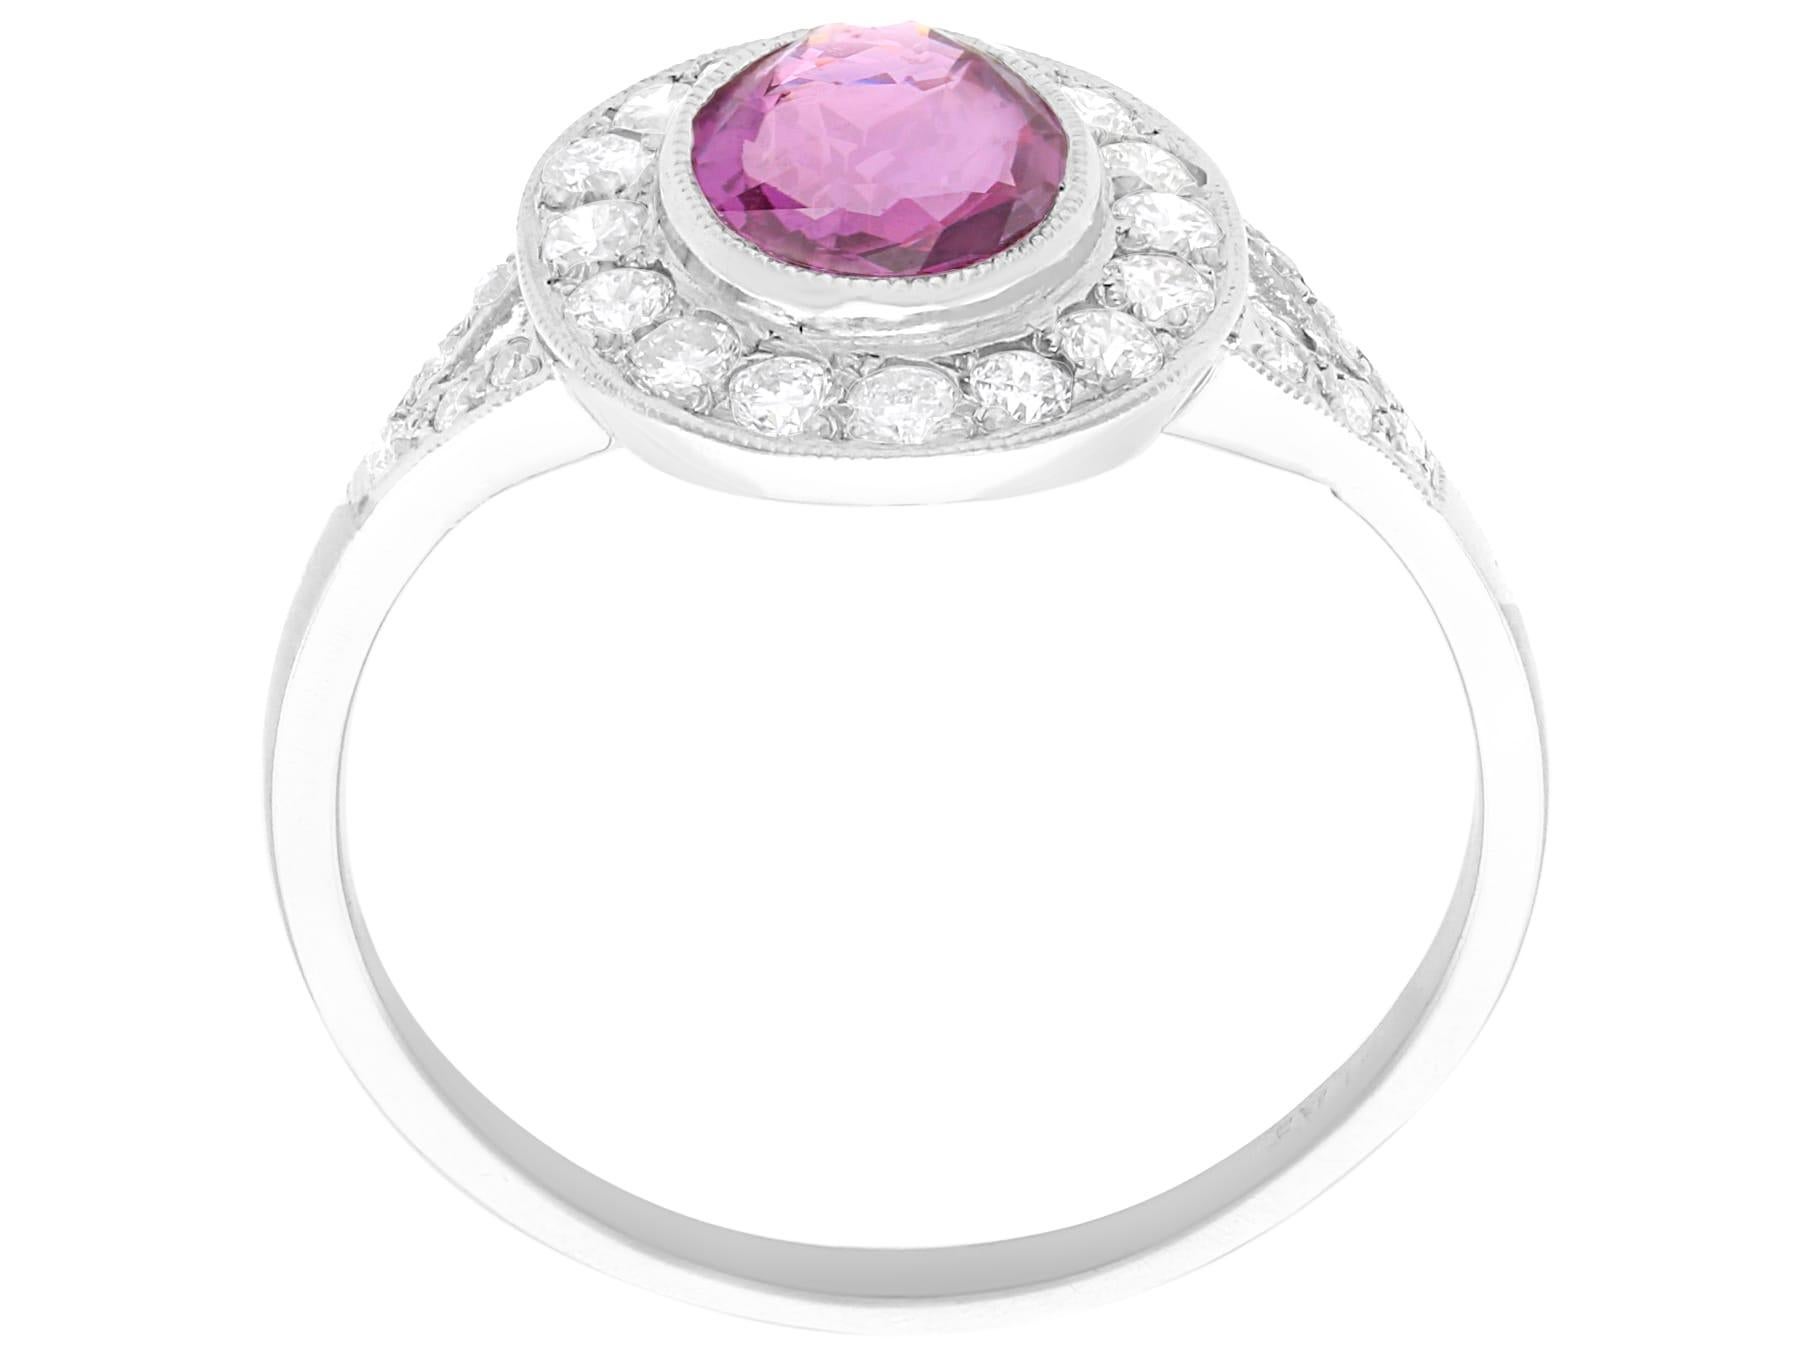 Women's or Men's Vintage 1.88 Carat Pink Sapphire Diamond and Platinum Dress Ring For Sale